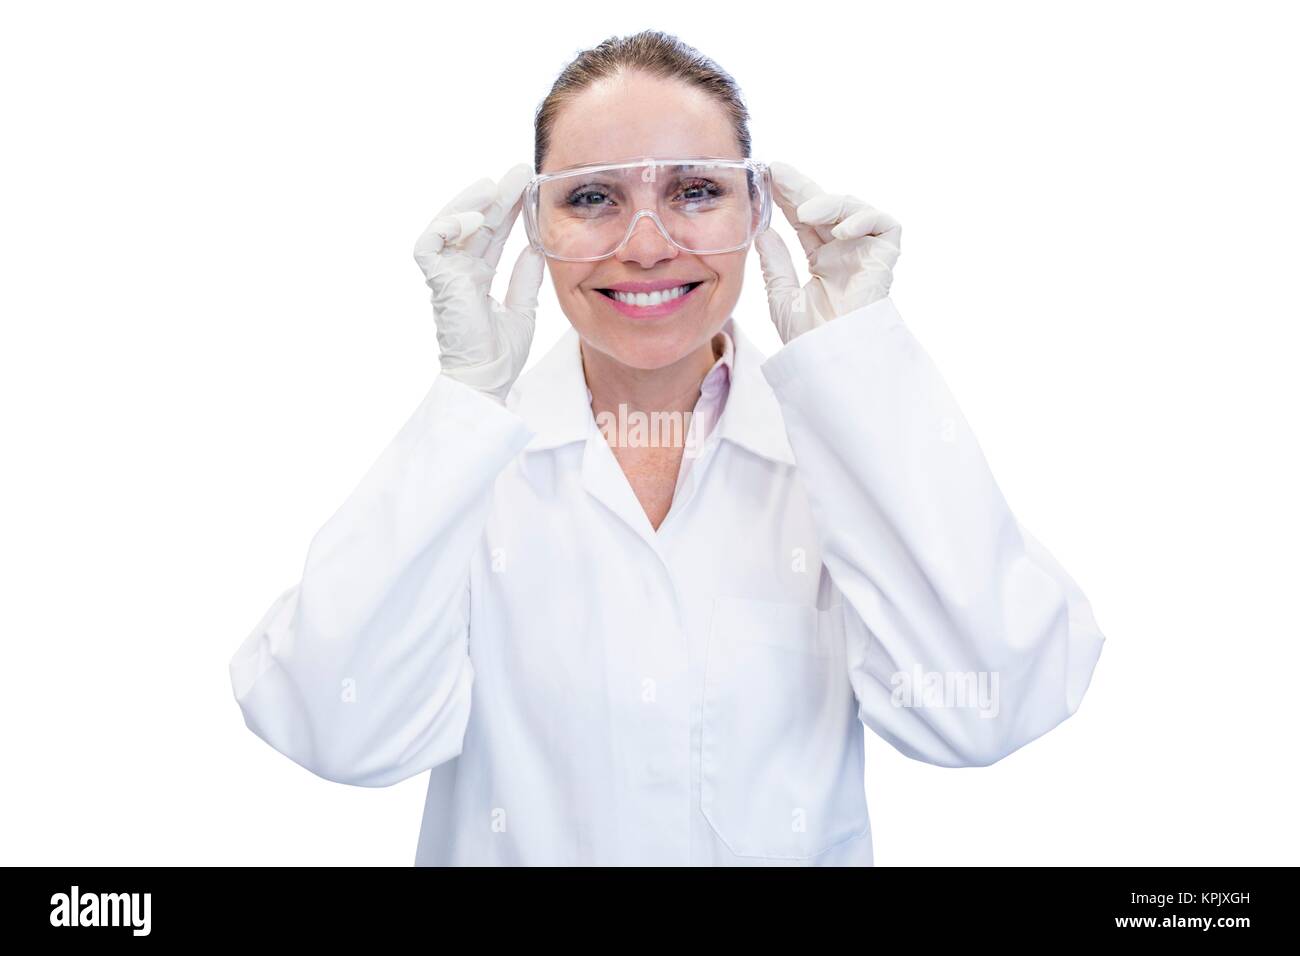 Female laboratory assistant adjusting safety goggles, portrait. Stock Photo